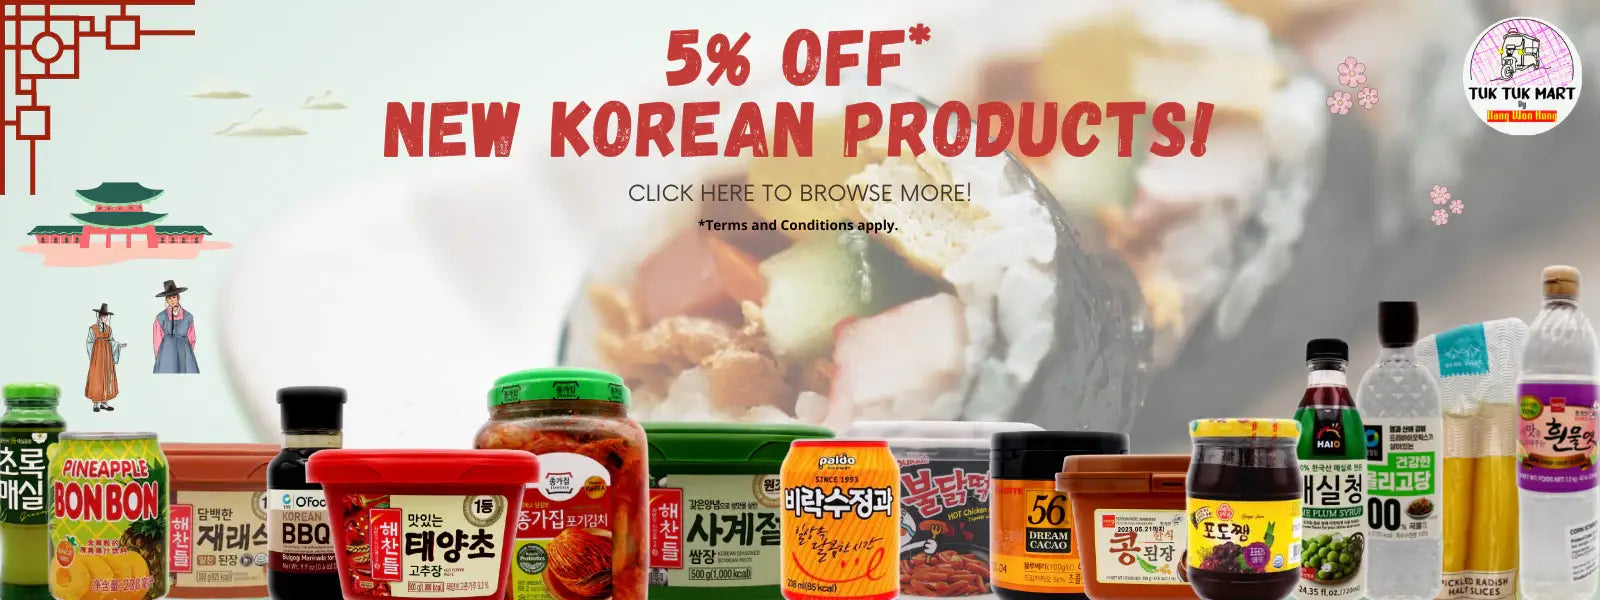 5% off* new Korean products